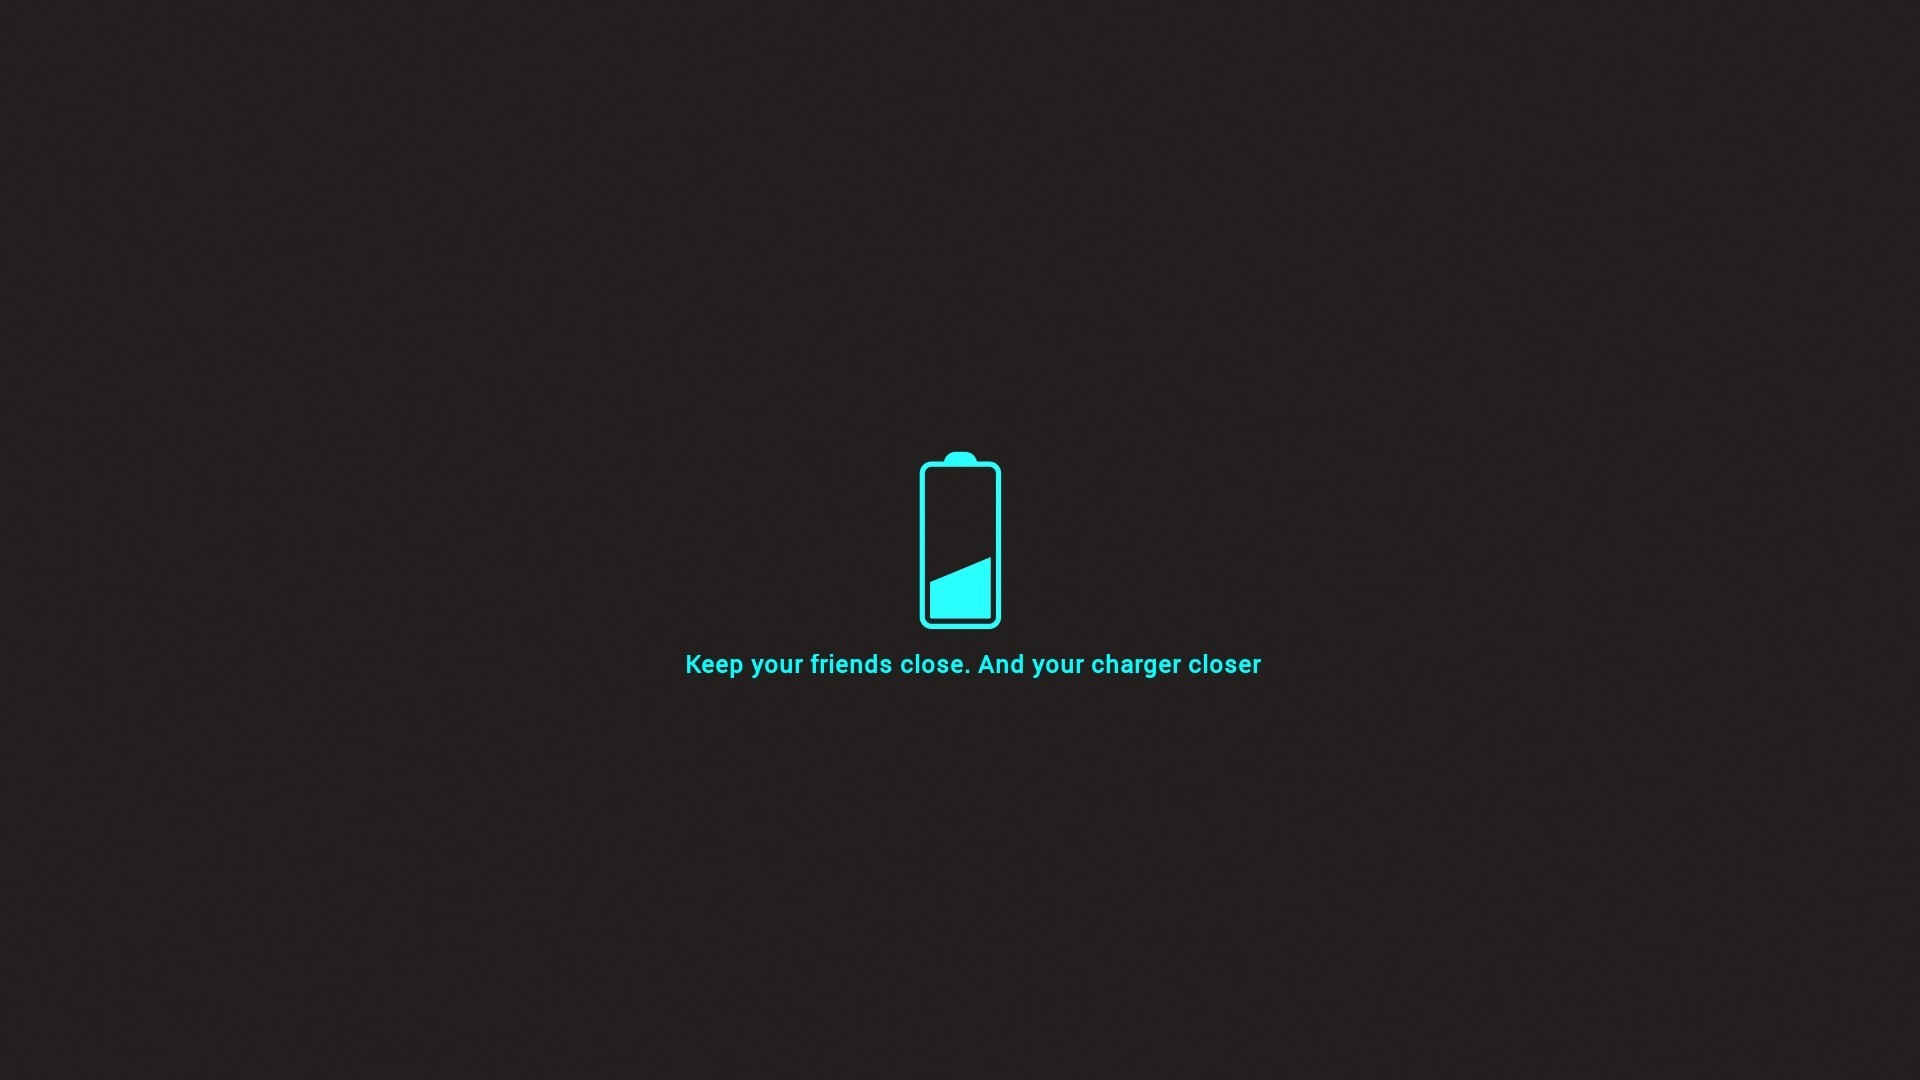 General 1920x1080 minimalism quote typography simple background battery humor artwork cyan